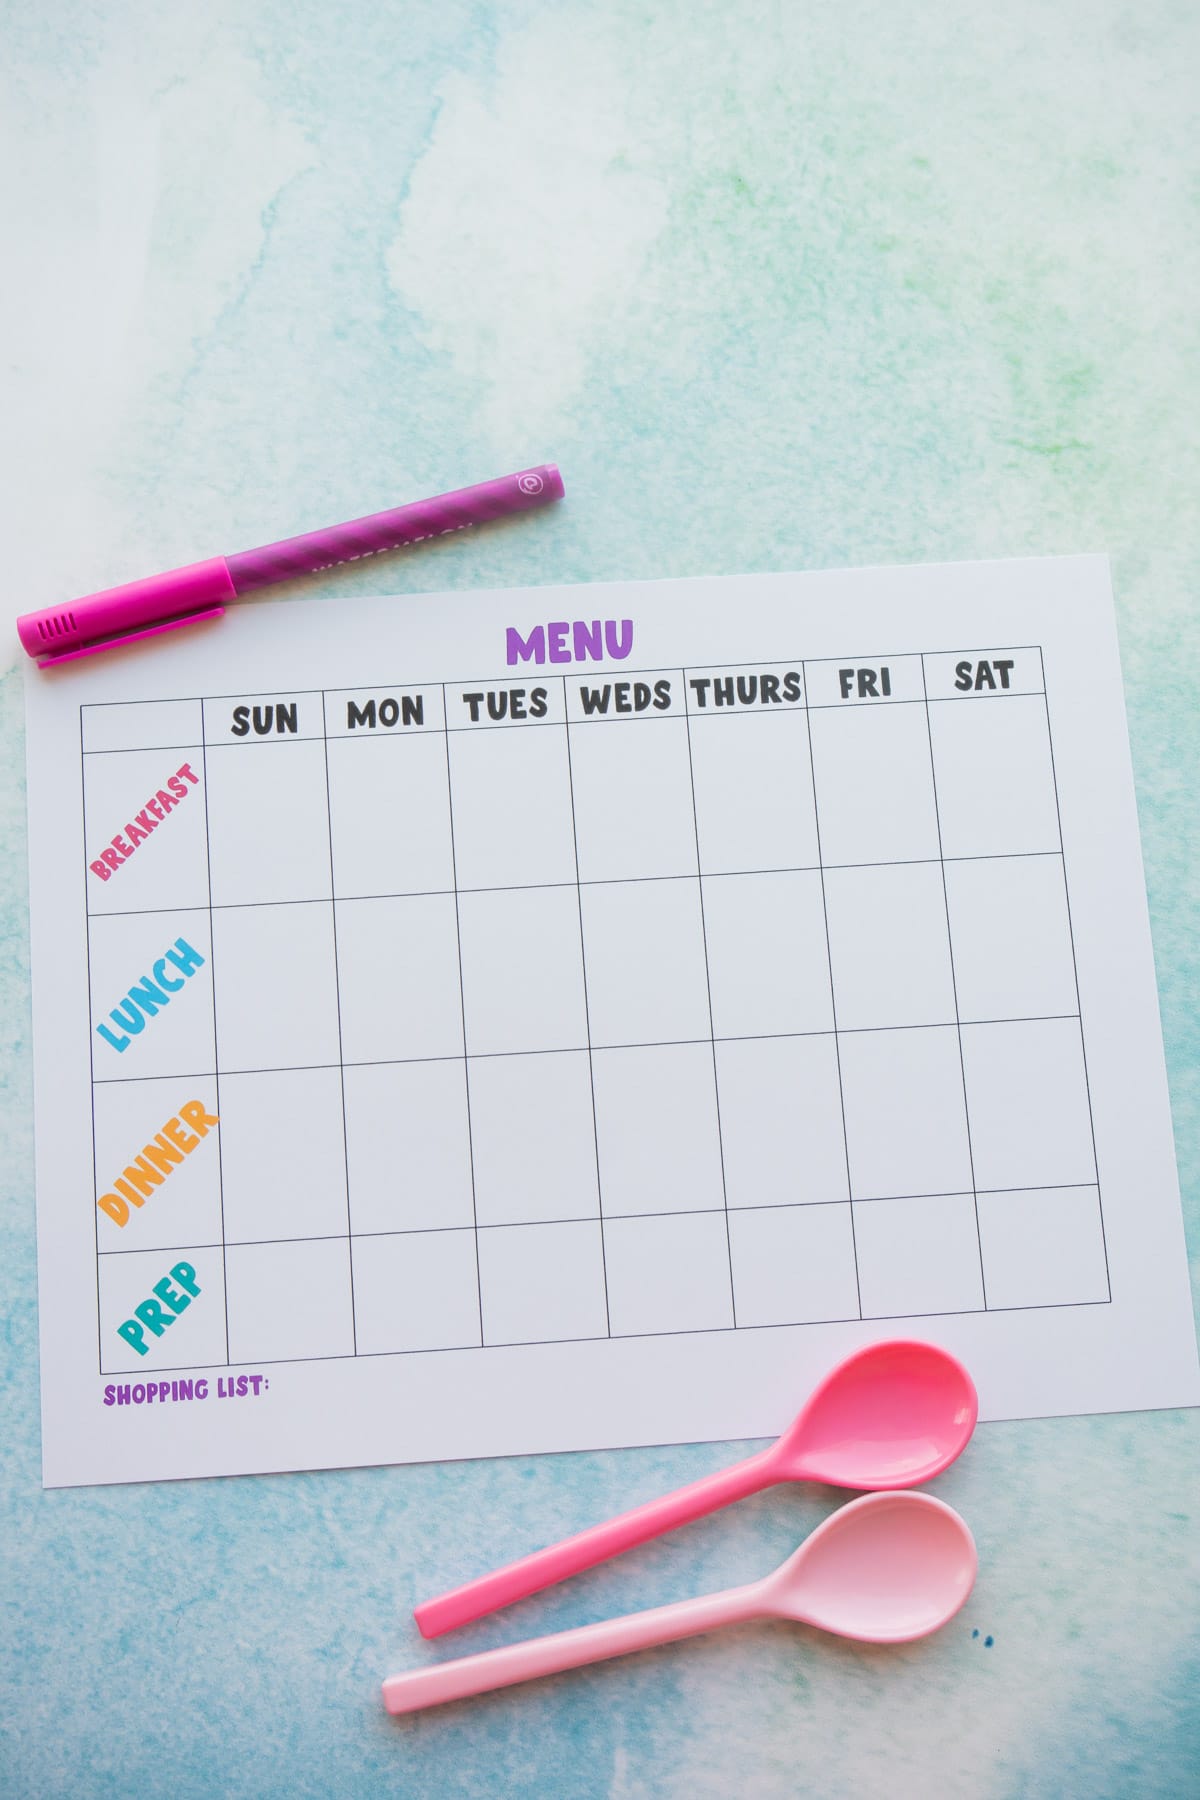 Pens, spoons, and a weekly meal planner